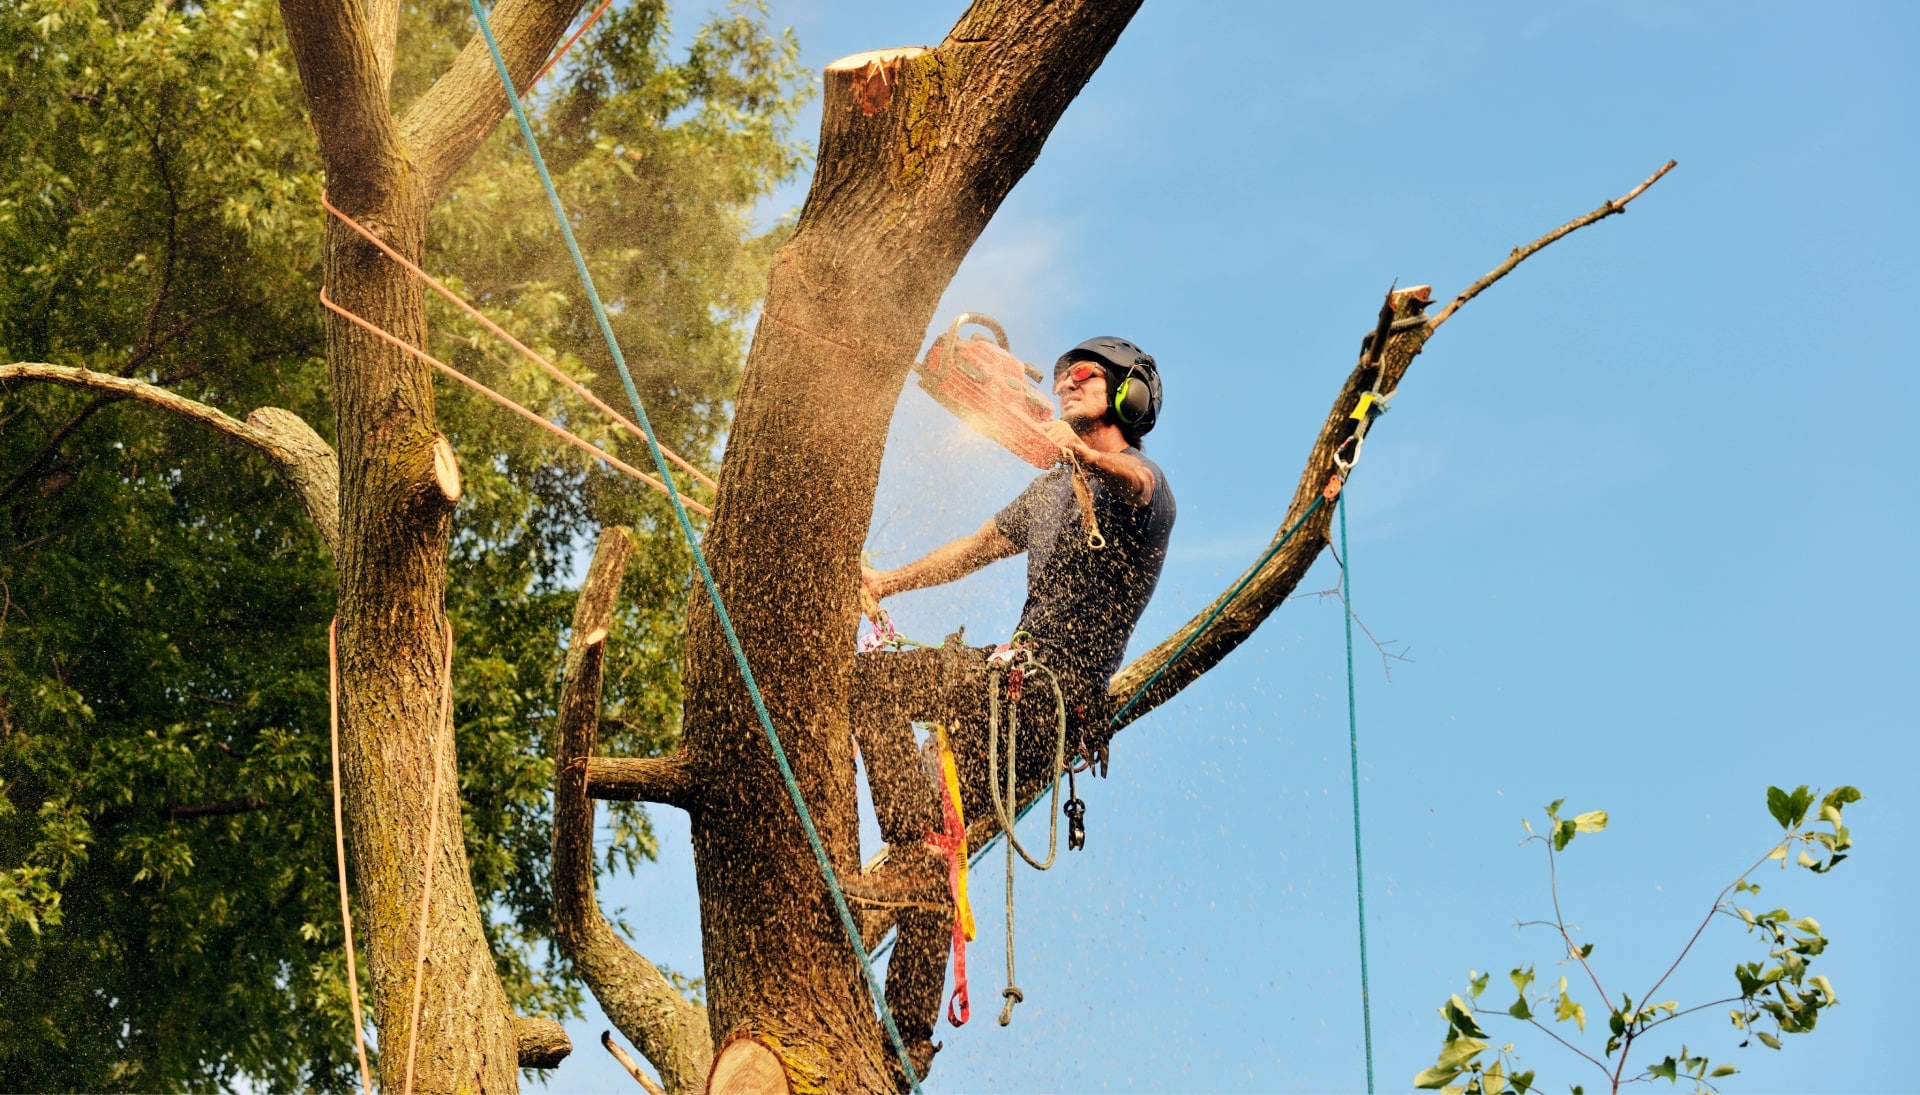 Medford tree removal experts solve tree issues.